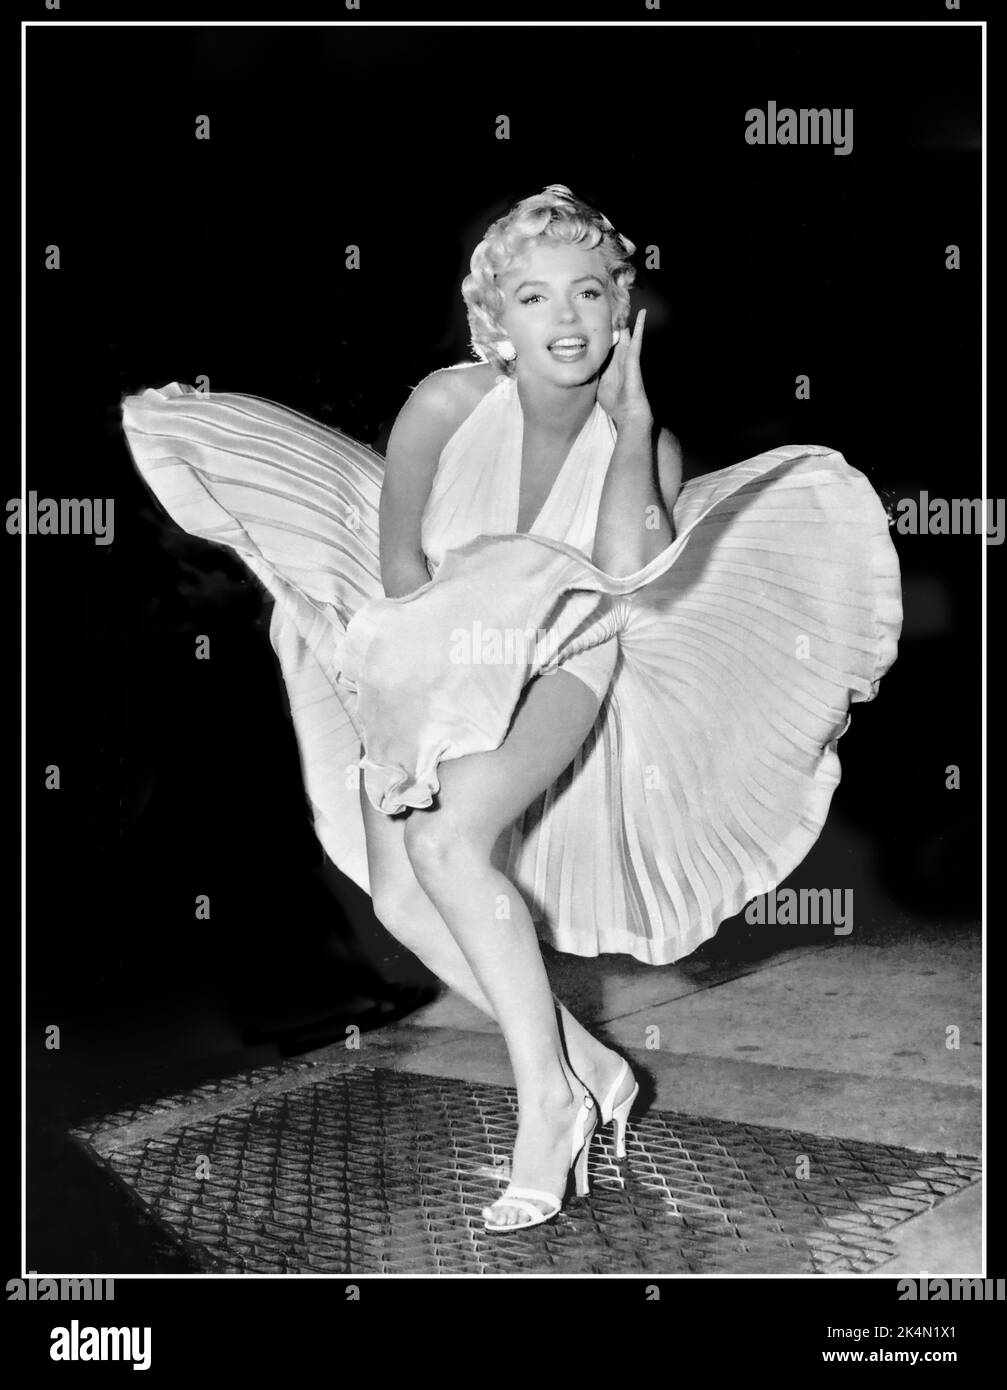 Marilyn Monroe skirt blowing up to promote Seven Year Itch Vintage Film Retro image  1950s while filming The Seven Year Itch on the streets of New York, she apparently stopped during the shooting of the famous 'skirt scene' and posed for the reporters and photographers who were covering the film shoot. The result an iconic image that instantly promoted the film. Date 9 September 1954 Stock Photo